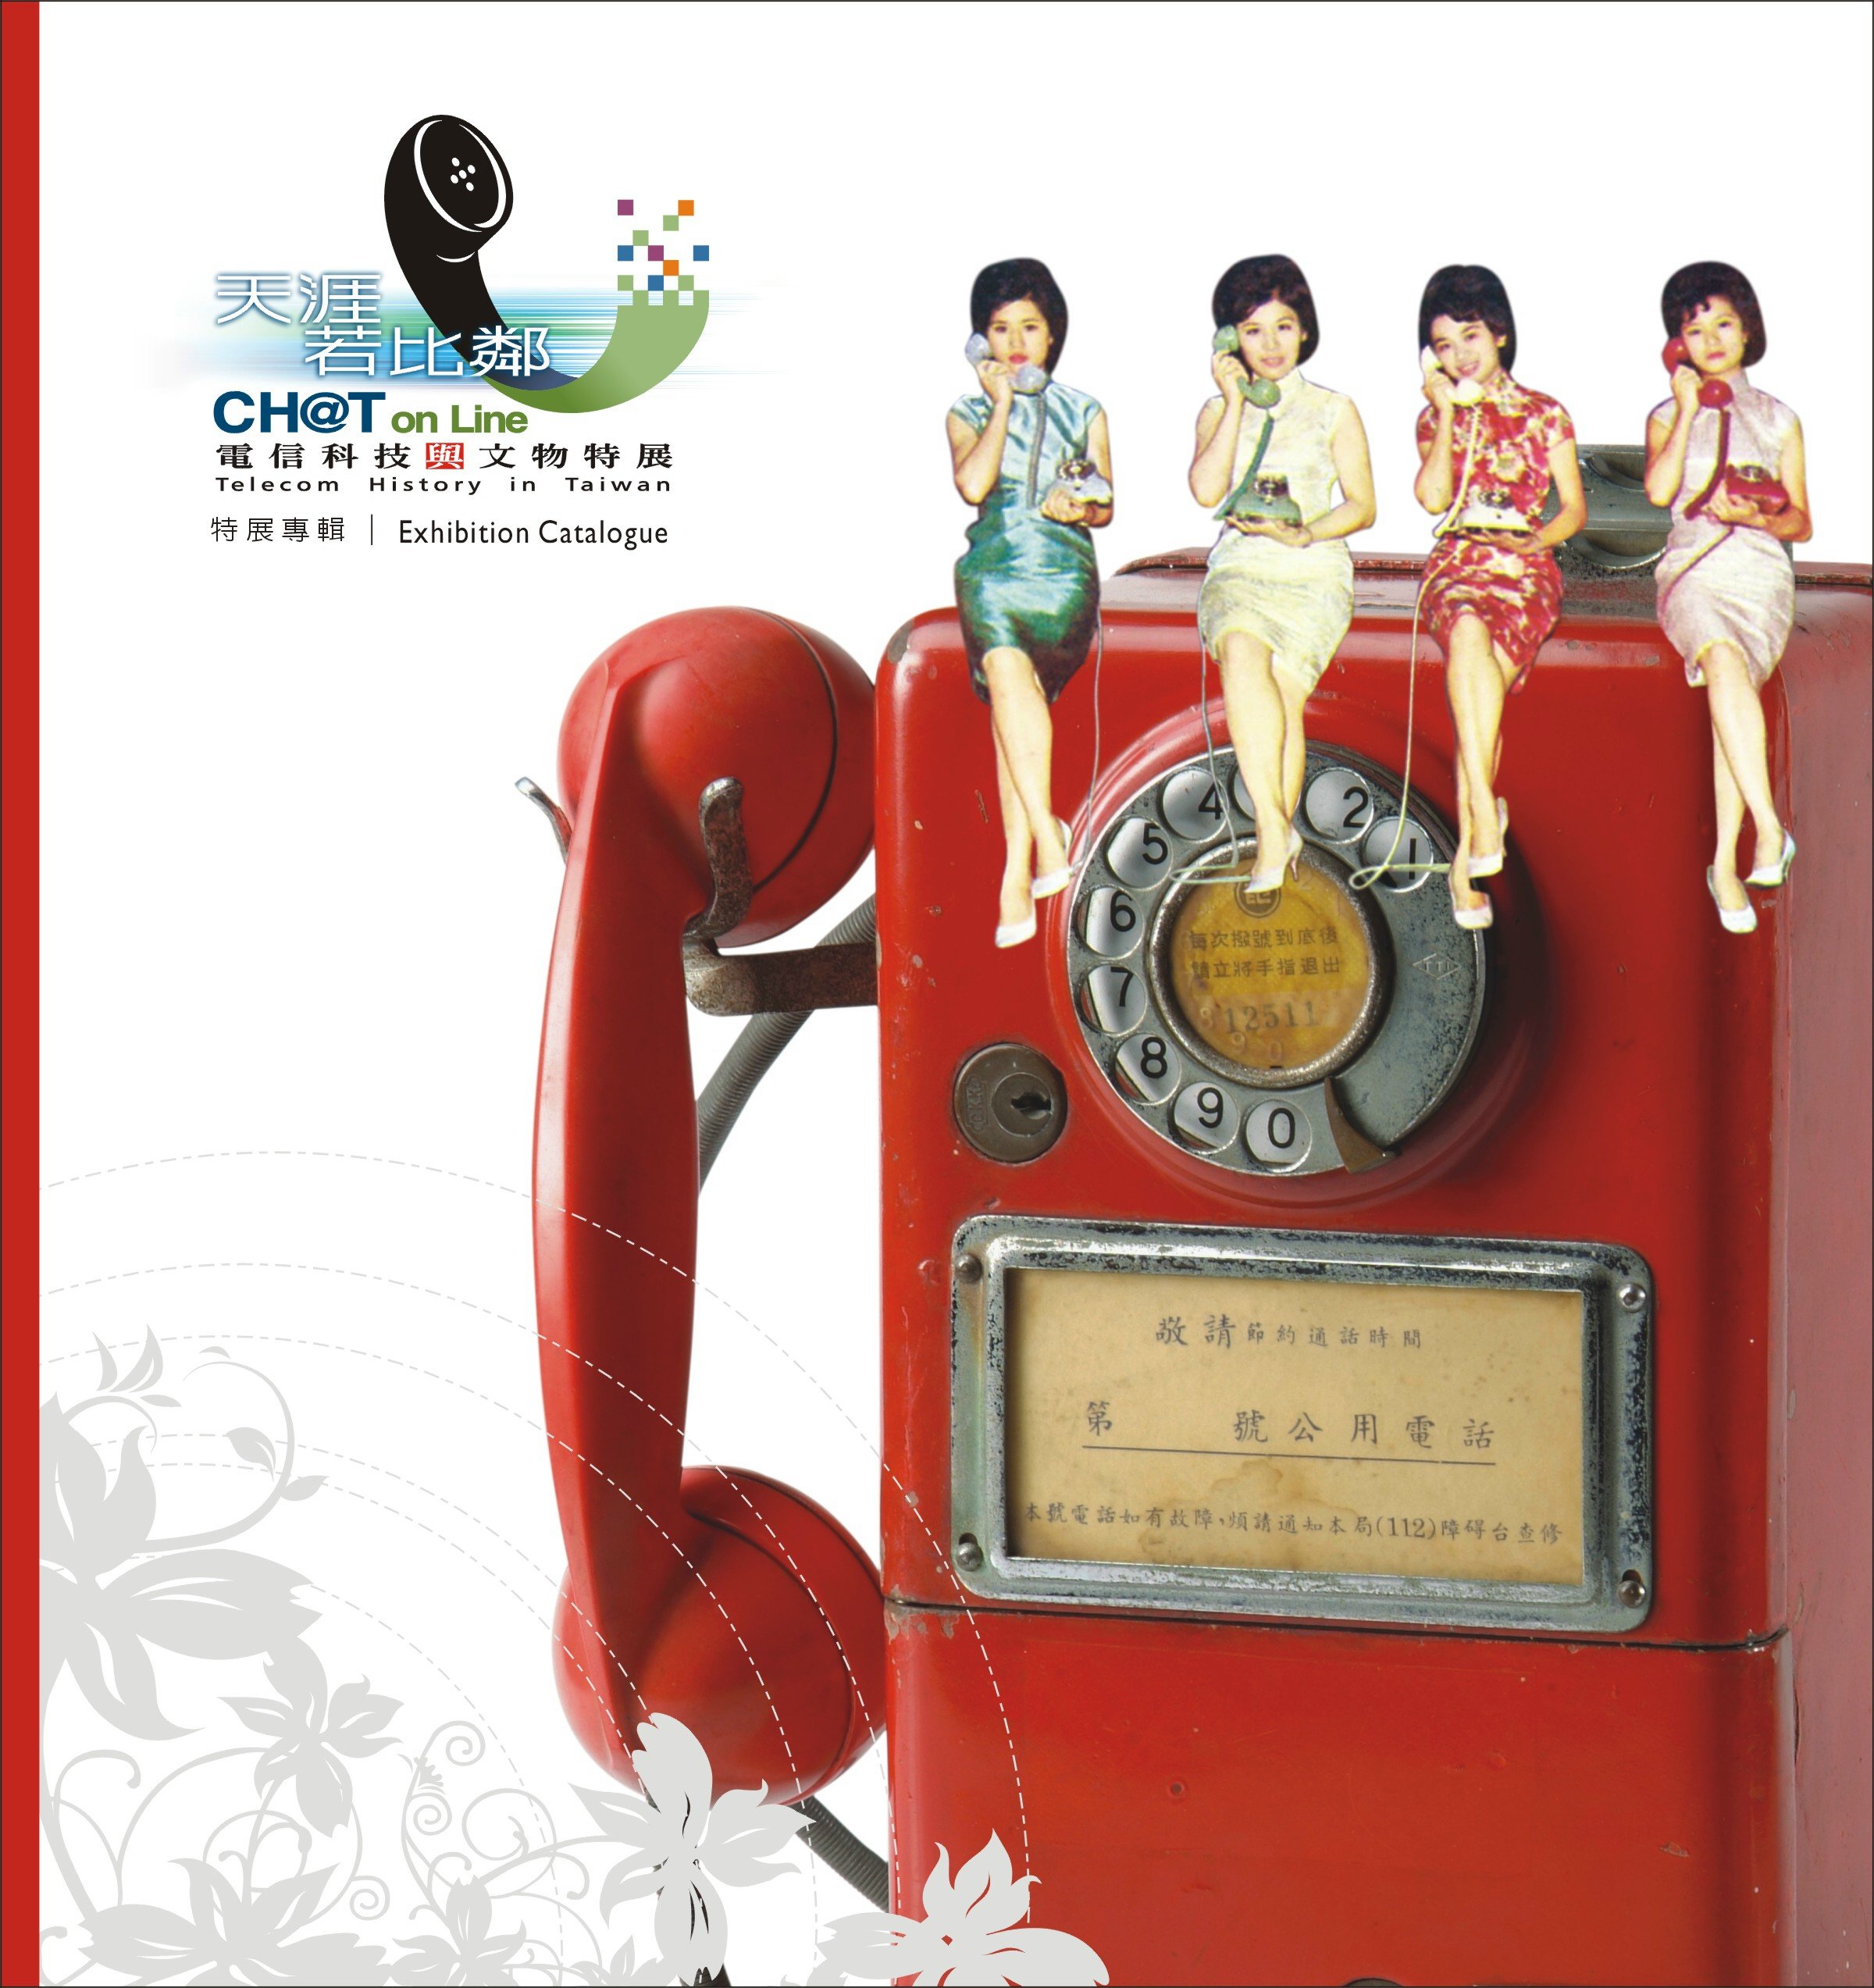 CHAT on Line: Telecom History in Taiwan: Exhibition Catalogue